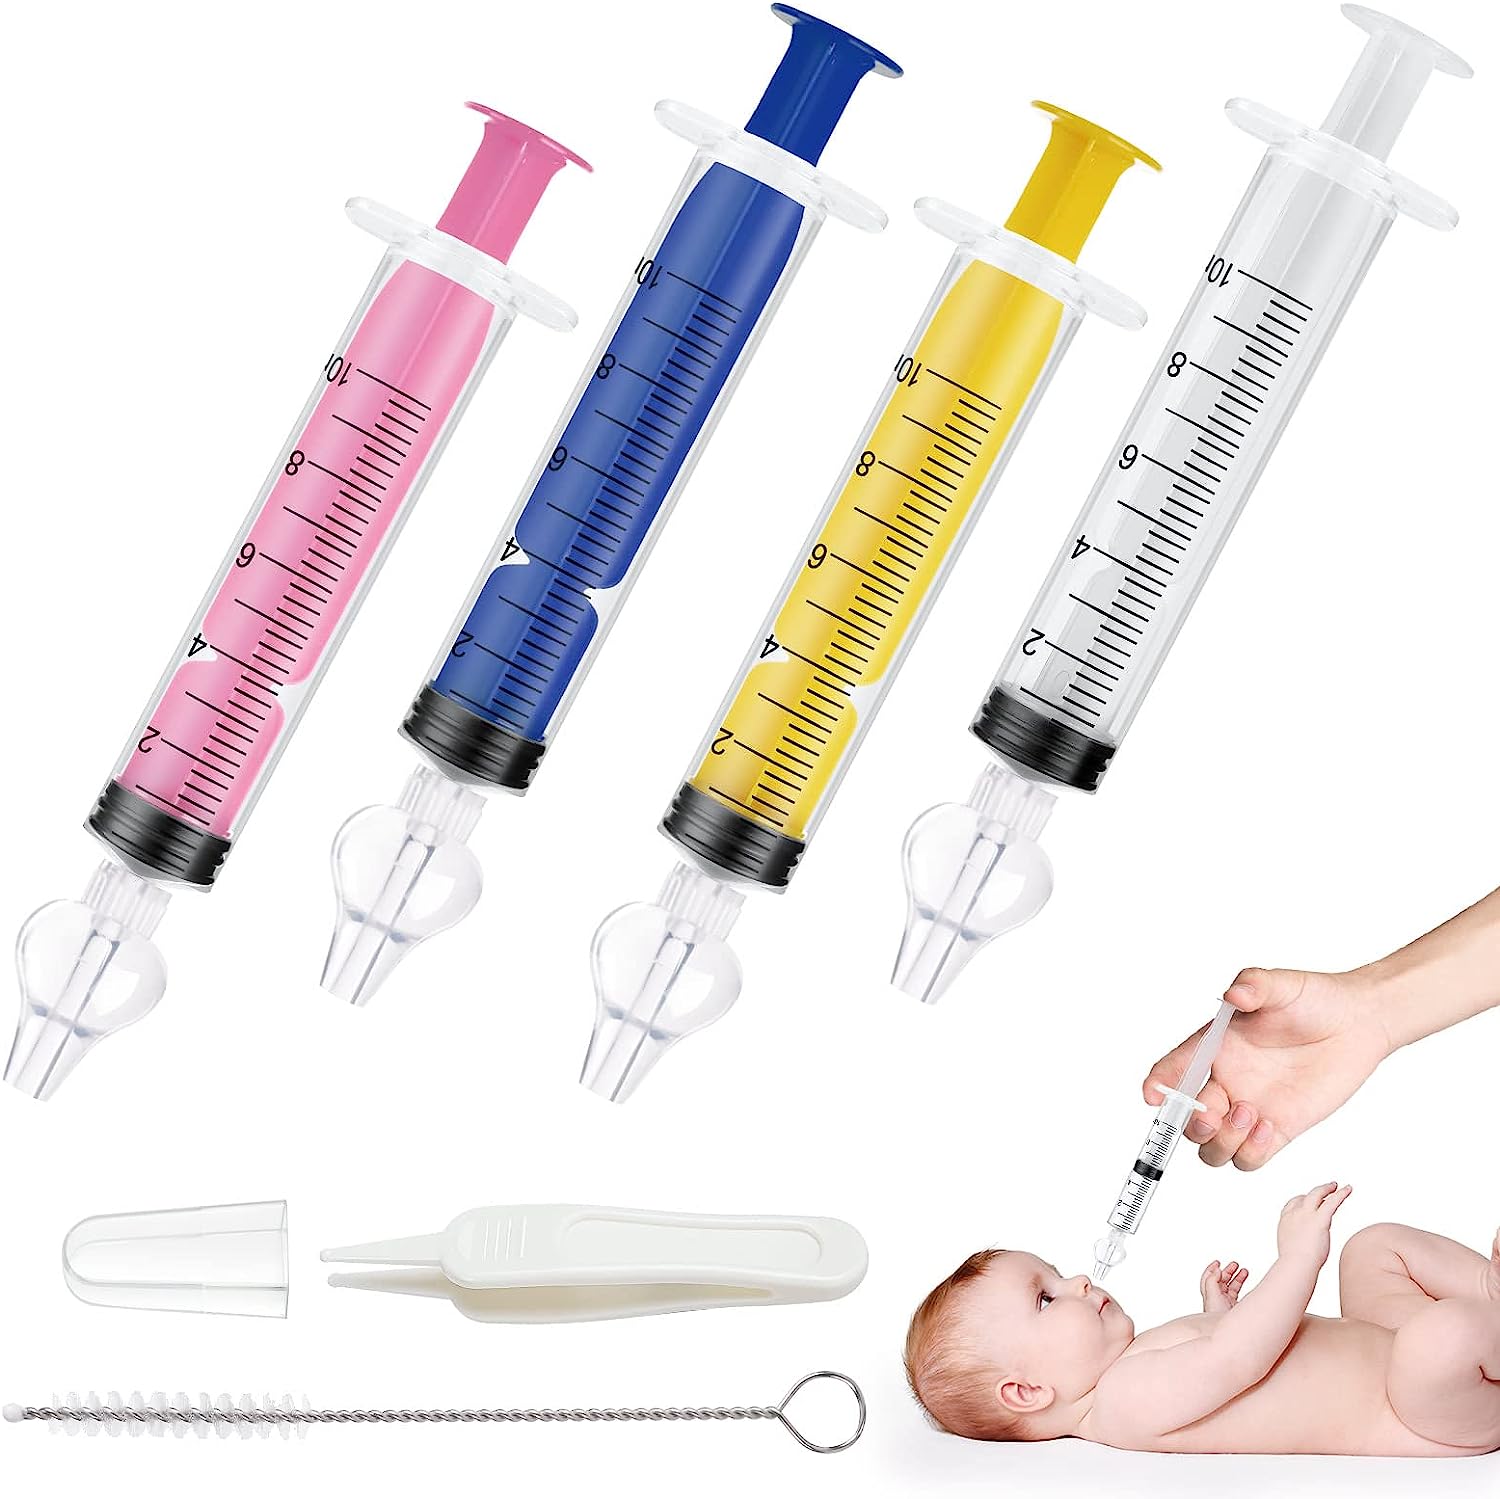 baby nasal syringe color manual Nasal irrigation, with cleanable and reusable silicone nasal suction nozzle, with straw and clip